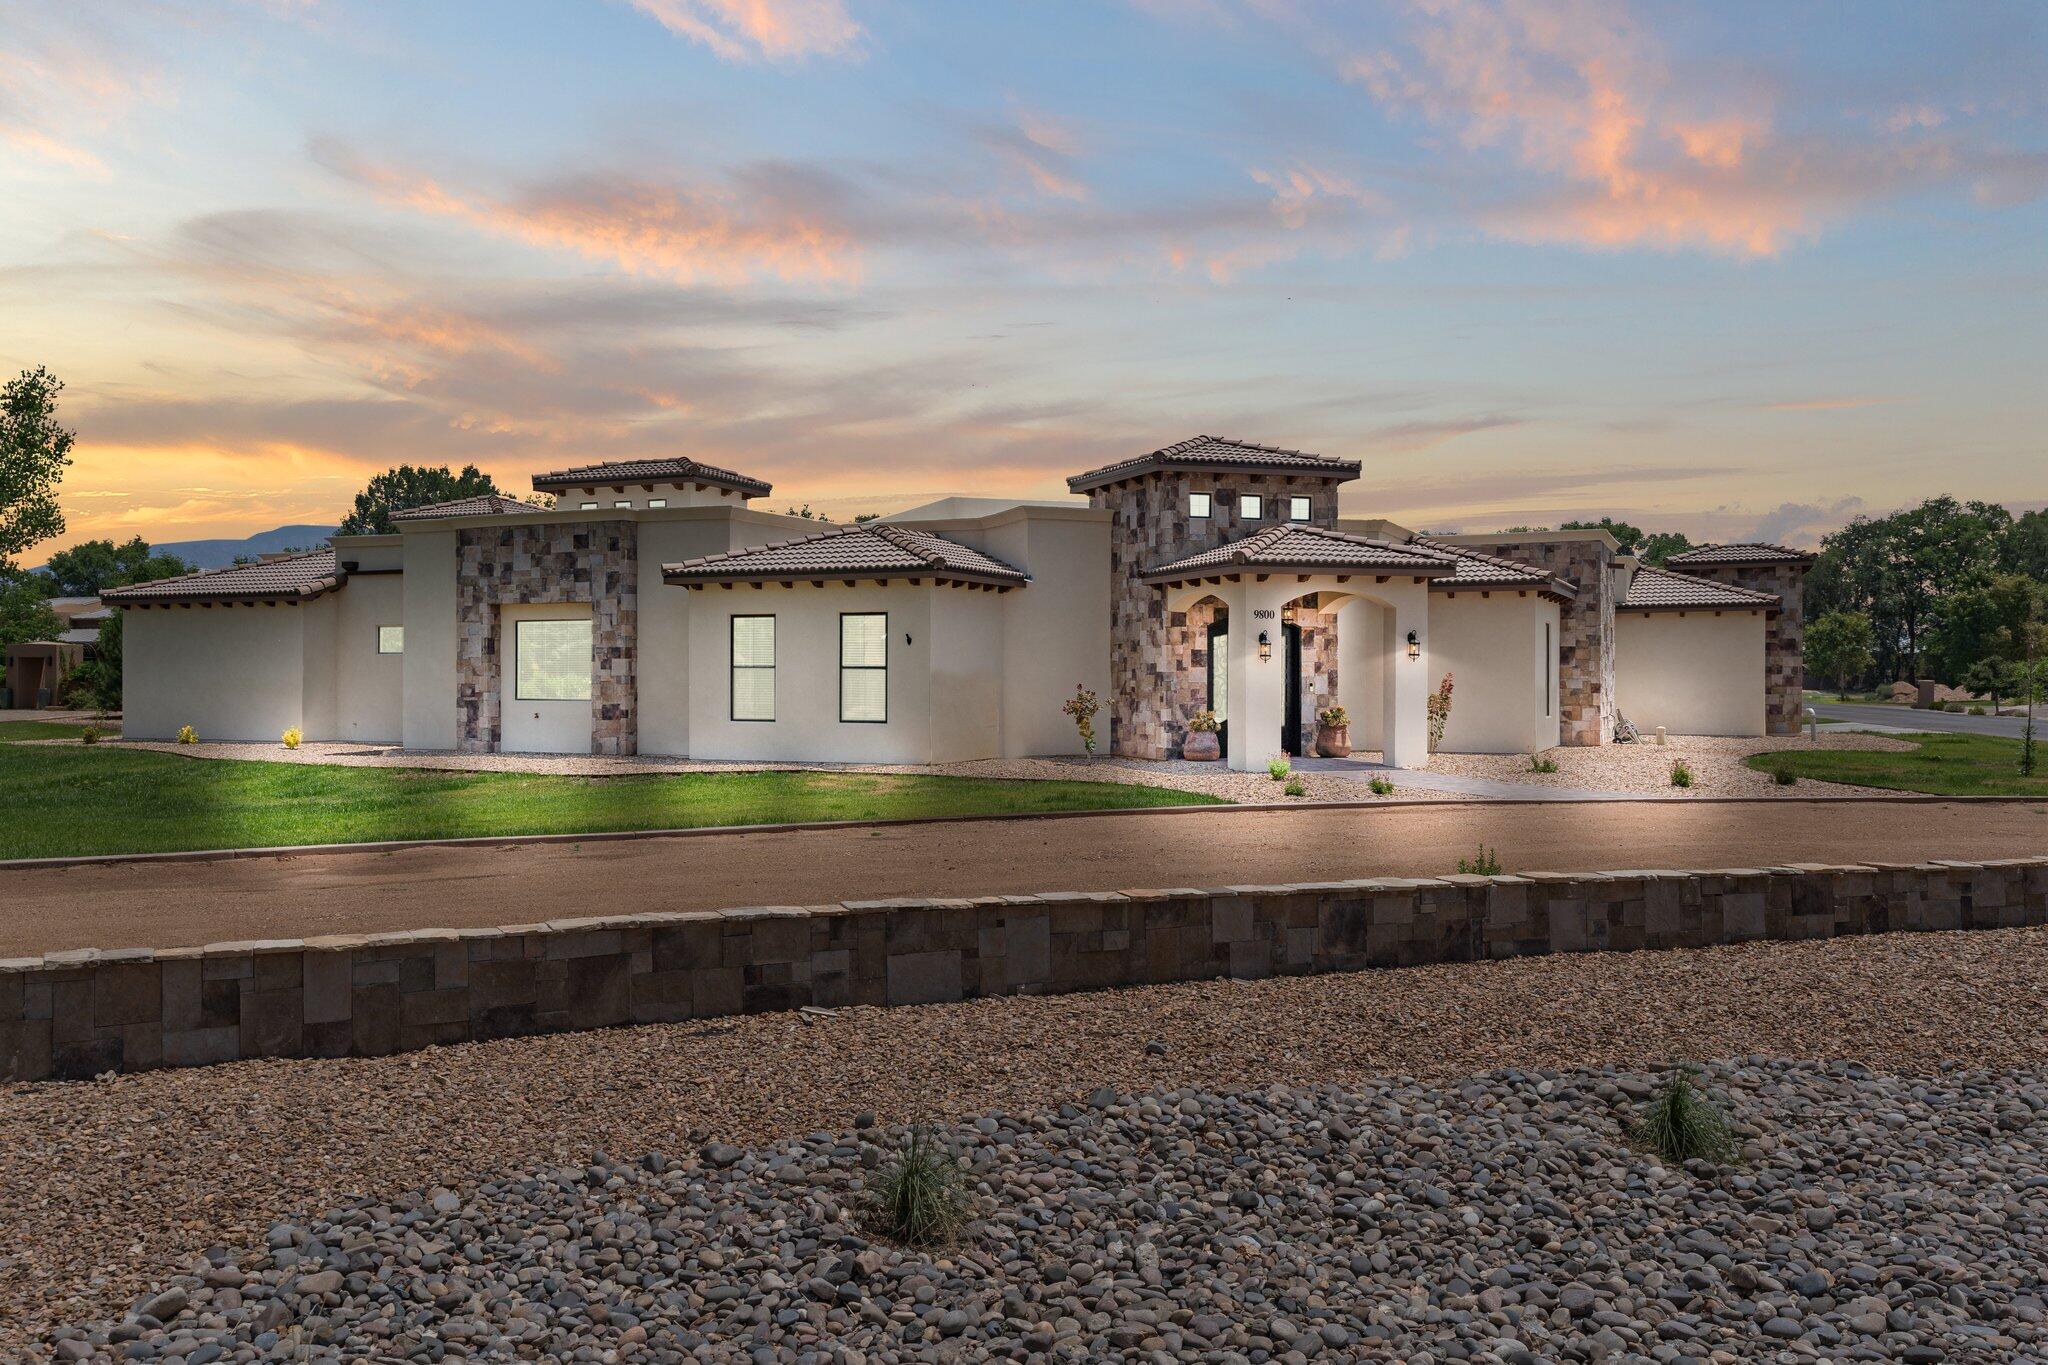 Luxurious Mediterranean style home by Rio Grande Construction, located behind the gates in the Bona Terra Farms community on a 1.16 acre property.  This expansive home boasts 4,930sf with 5 bedrooms, 5.5 bathrooms, a home theater and 6 car garage with backyard access. Beautiful living area with hand carved trusses lining the ceiling, fireplace and built-in wet bar. Chefs kitchen with designer cabs, quartz countertops, upgraded appliances, double islands, pantry and dining space. Pour a glass of your favorite wine from the temperature controlled wine wall or a drink from the built-in bar with taps! Catch the latest movie in your home theater. Owners suite w/ spa bath! Great outdoor space with built-in kitchen, pool/hot tub, fire pit & a huge covered patio w/ tongue & groove ceiling